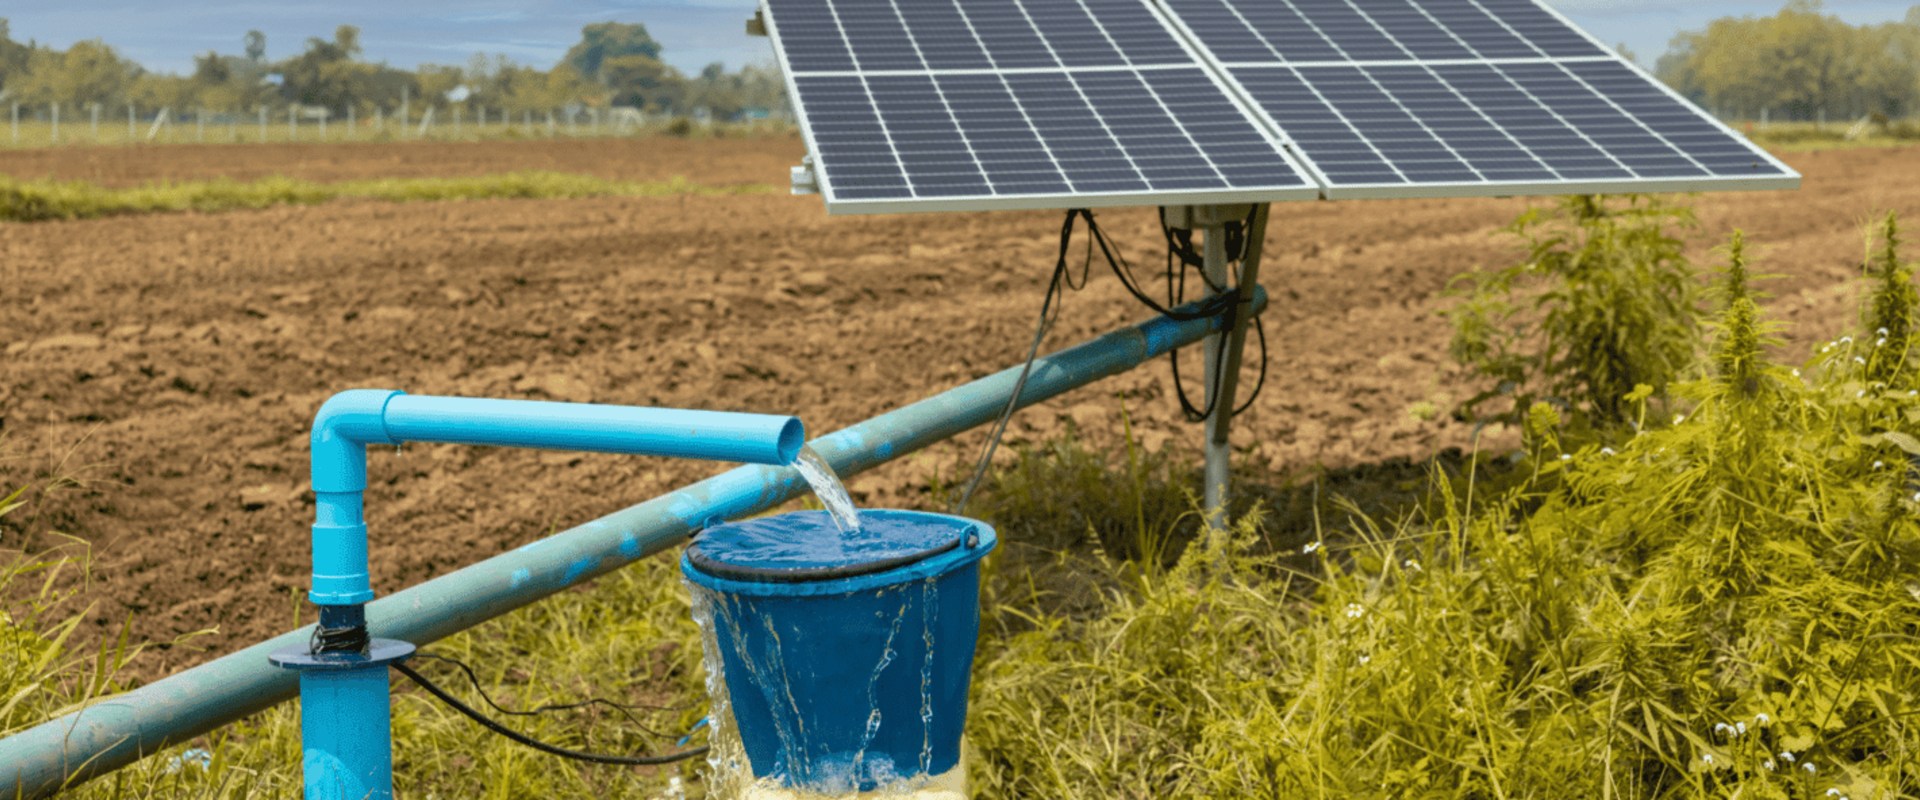 A Look at the Average Cost of a Solar Water Pump